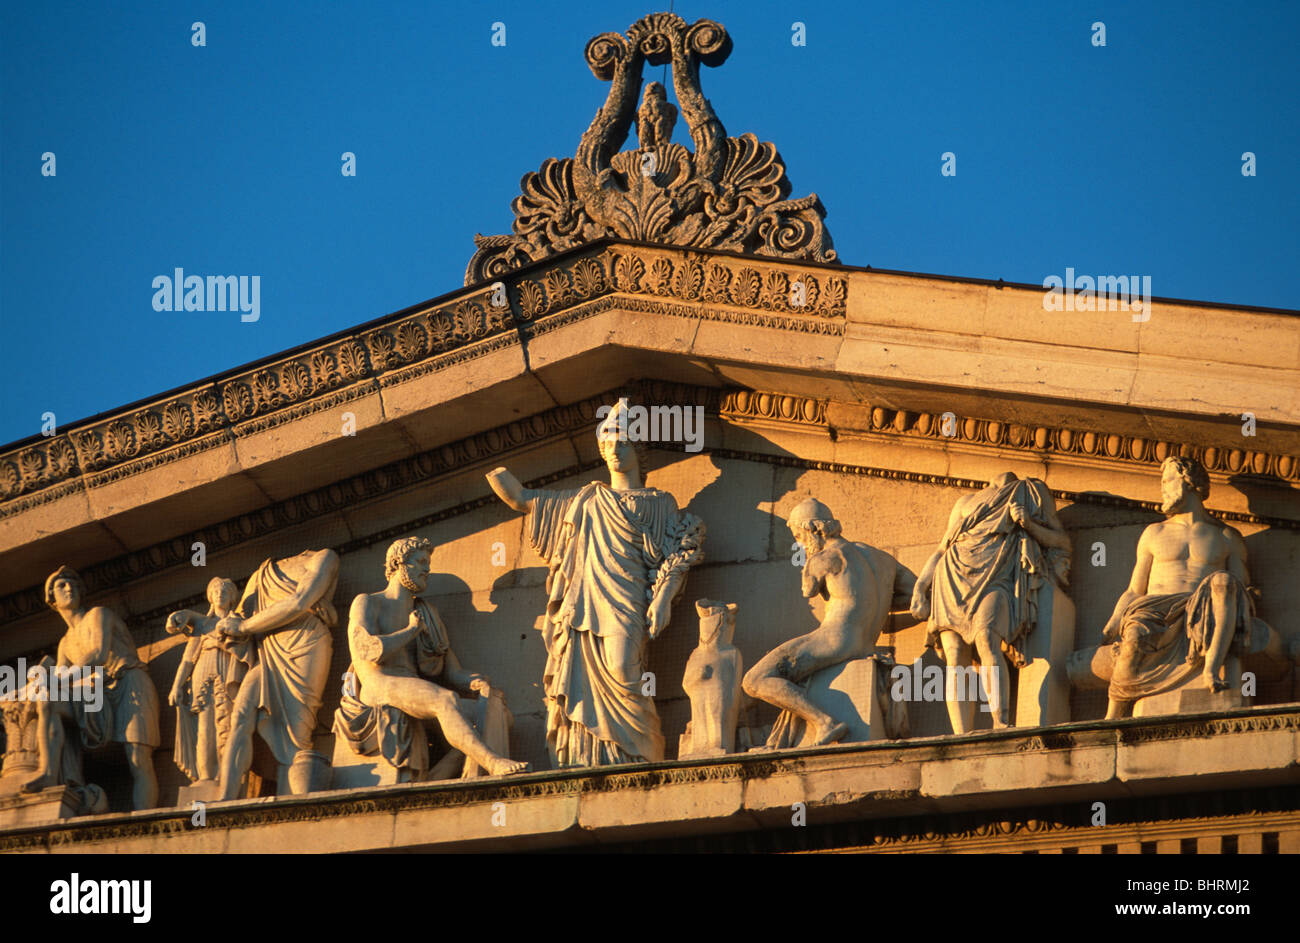 Detail of the pediment of the Glyptothek, Munich, Germany, bathed in golden evening light. Stock Photo